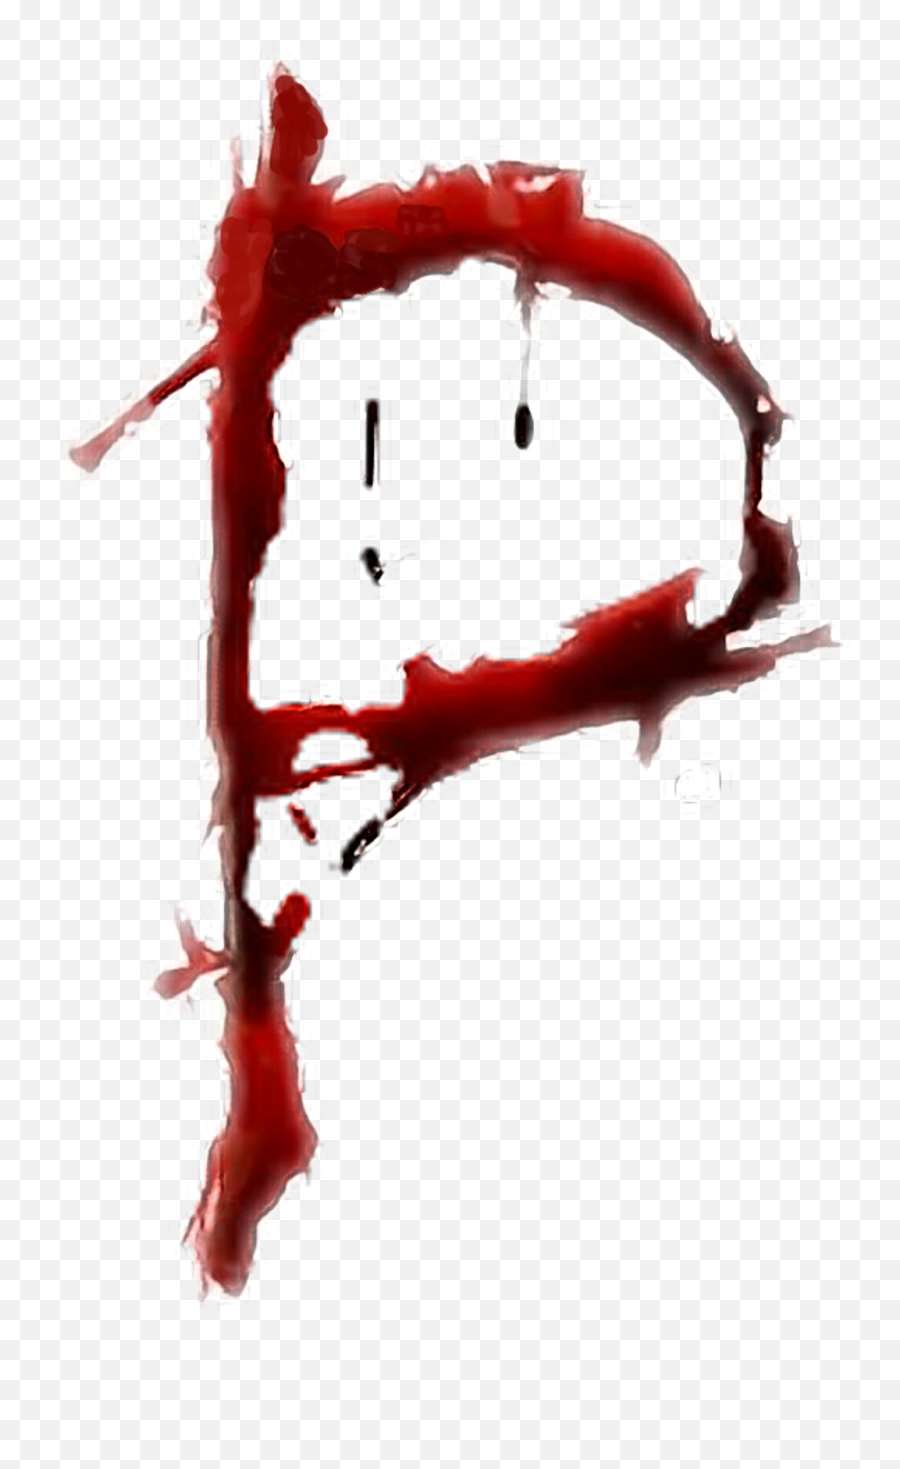 Blood Hand Png Transparent Collections - P Written On Hand With Blood,Boi Hand Transparent